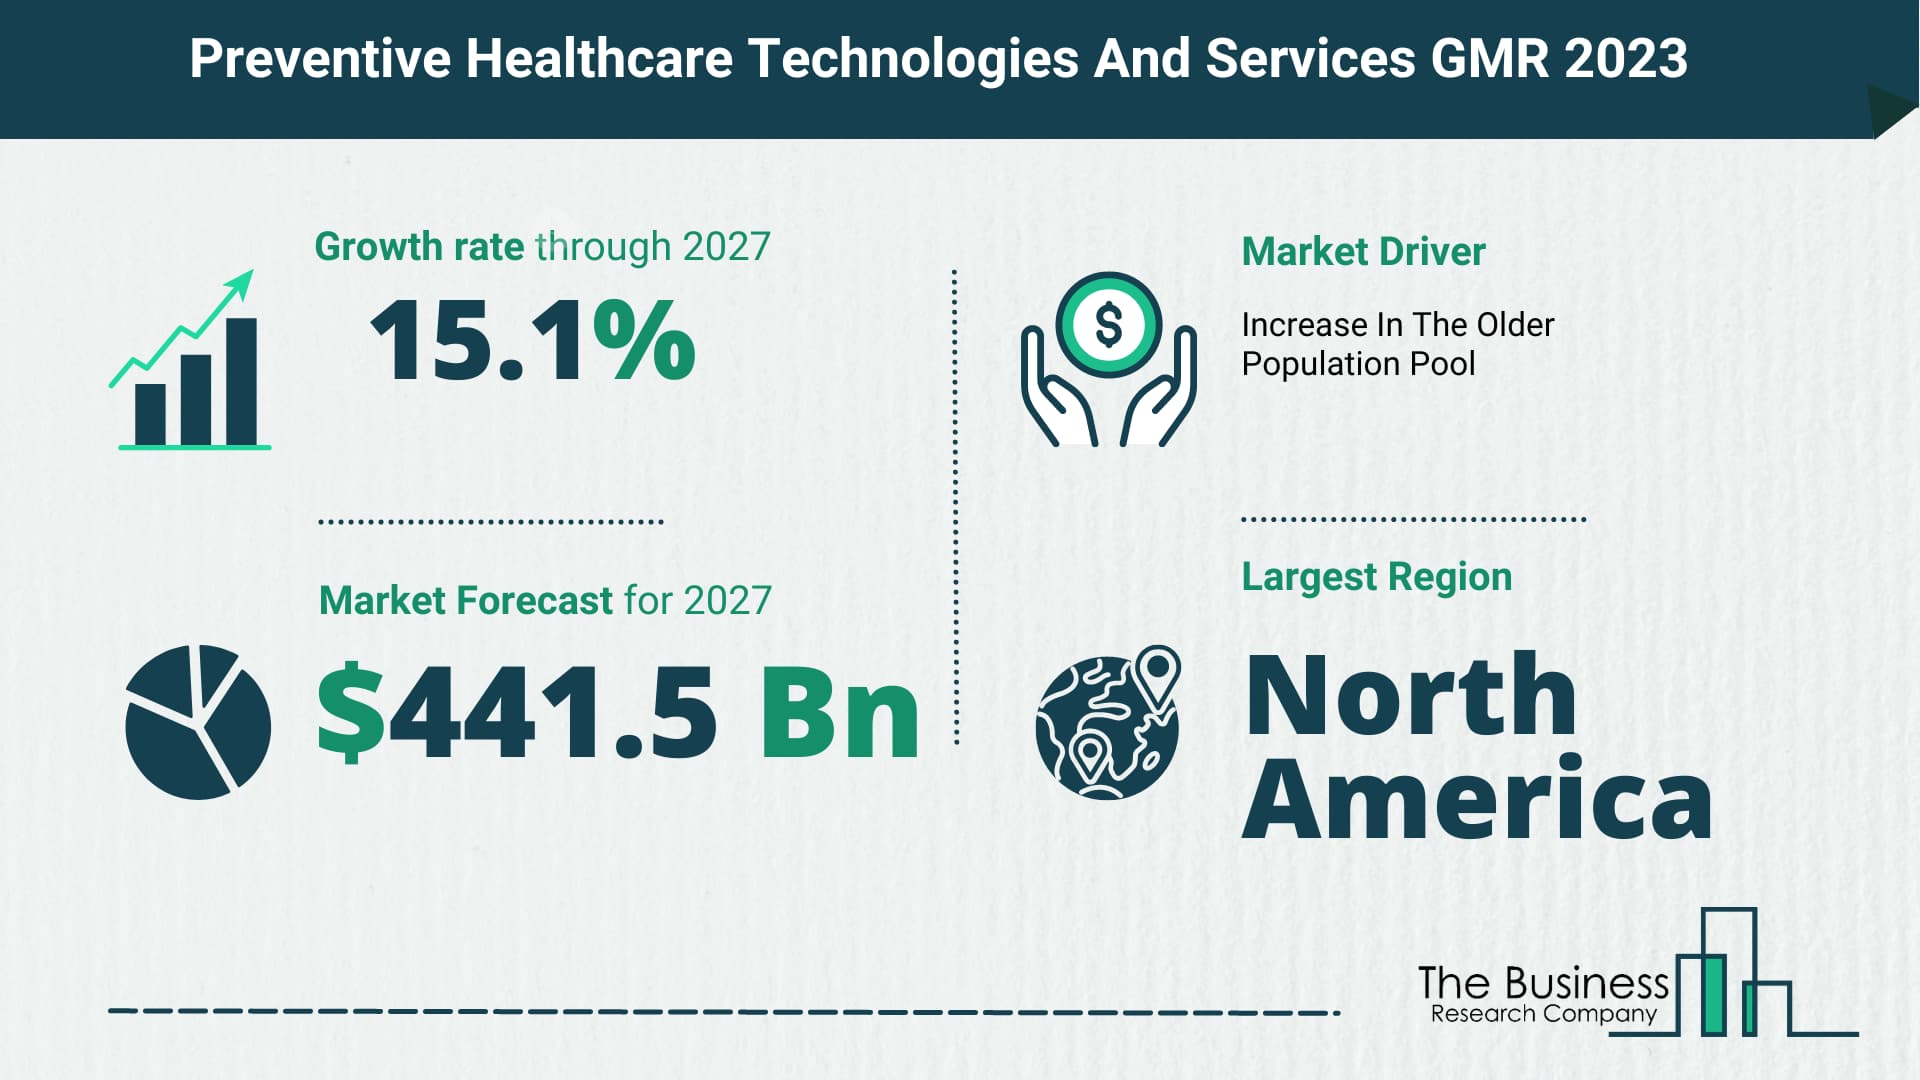 What Will The Preventive Healthcare Technologies And Services Market Look Like In 2023?